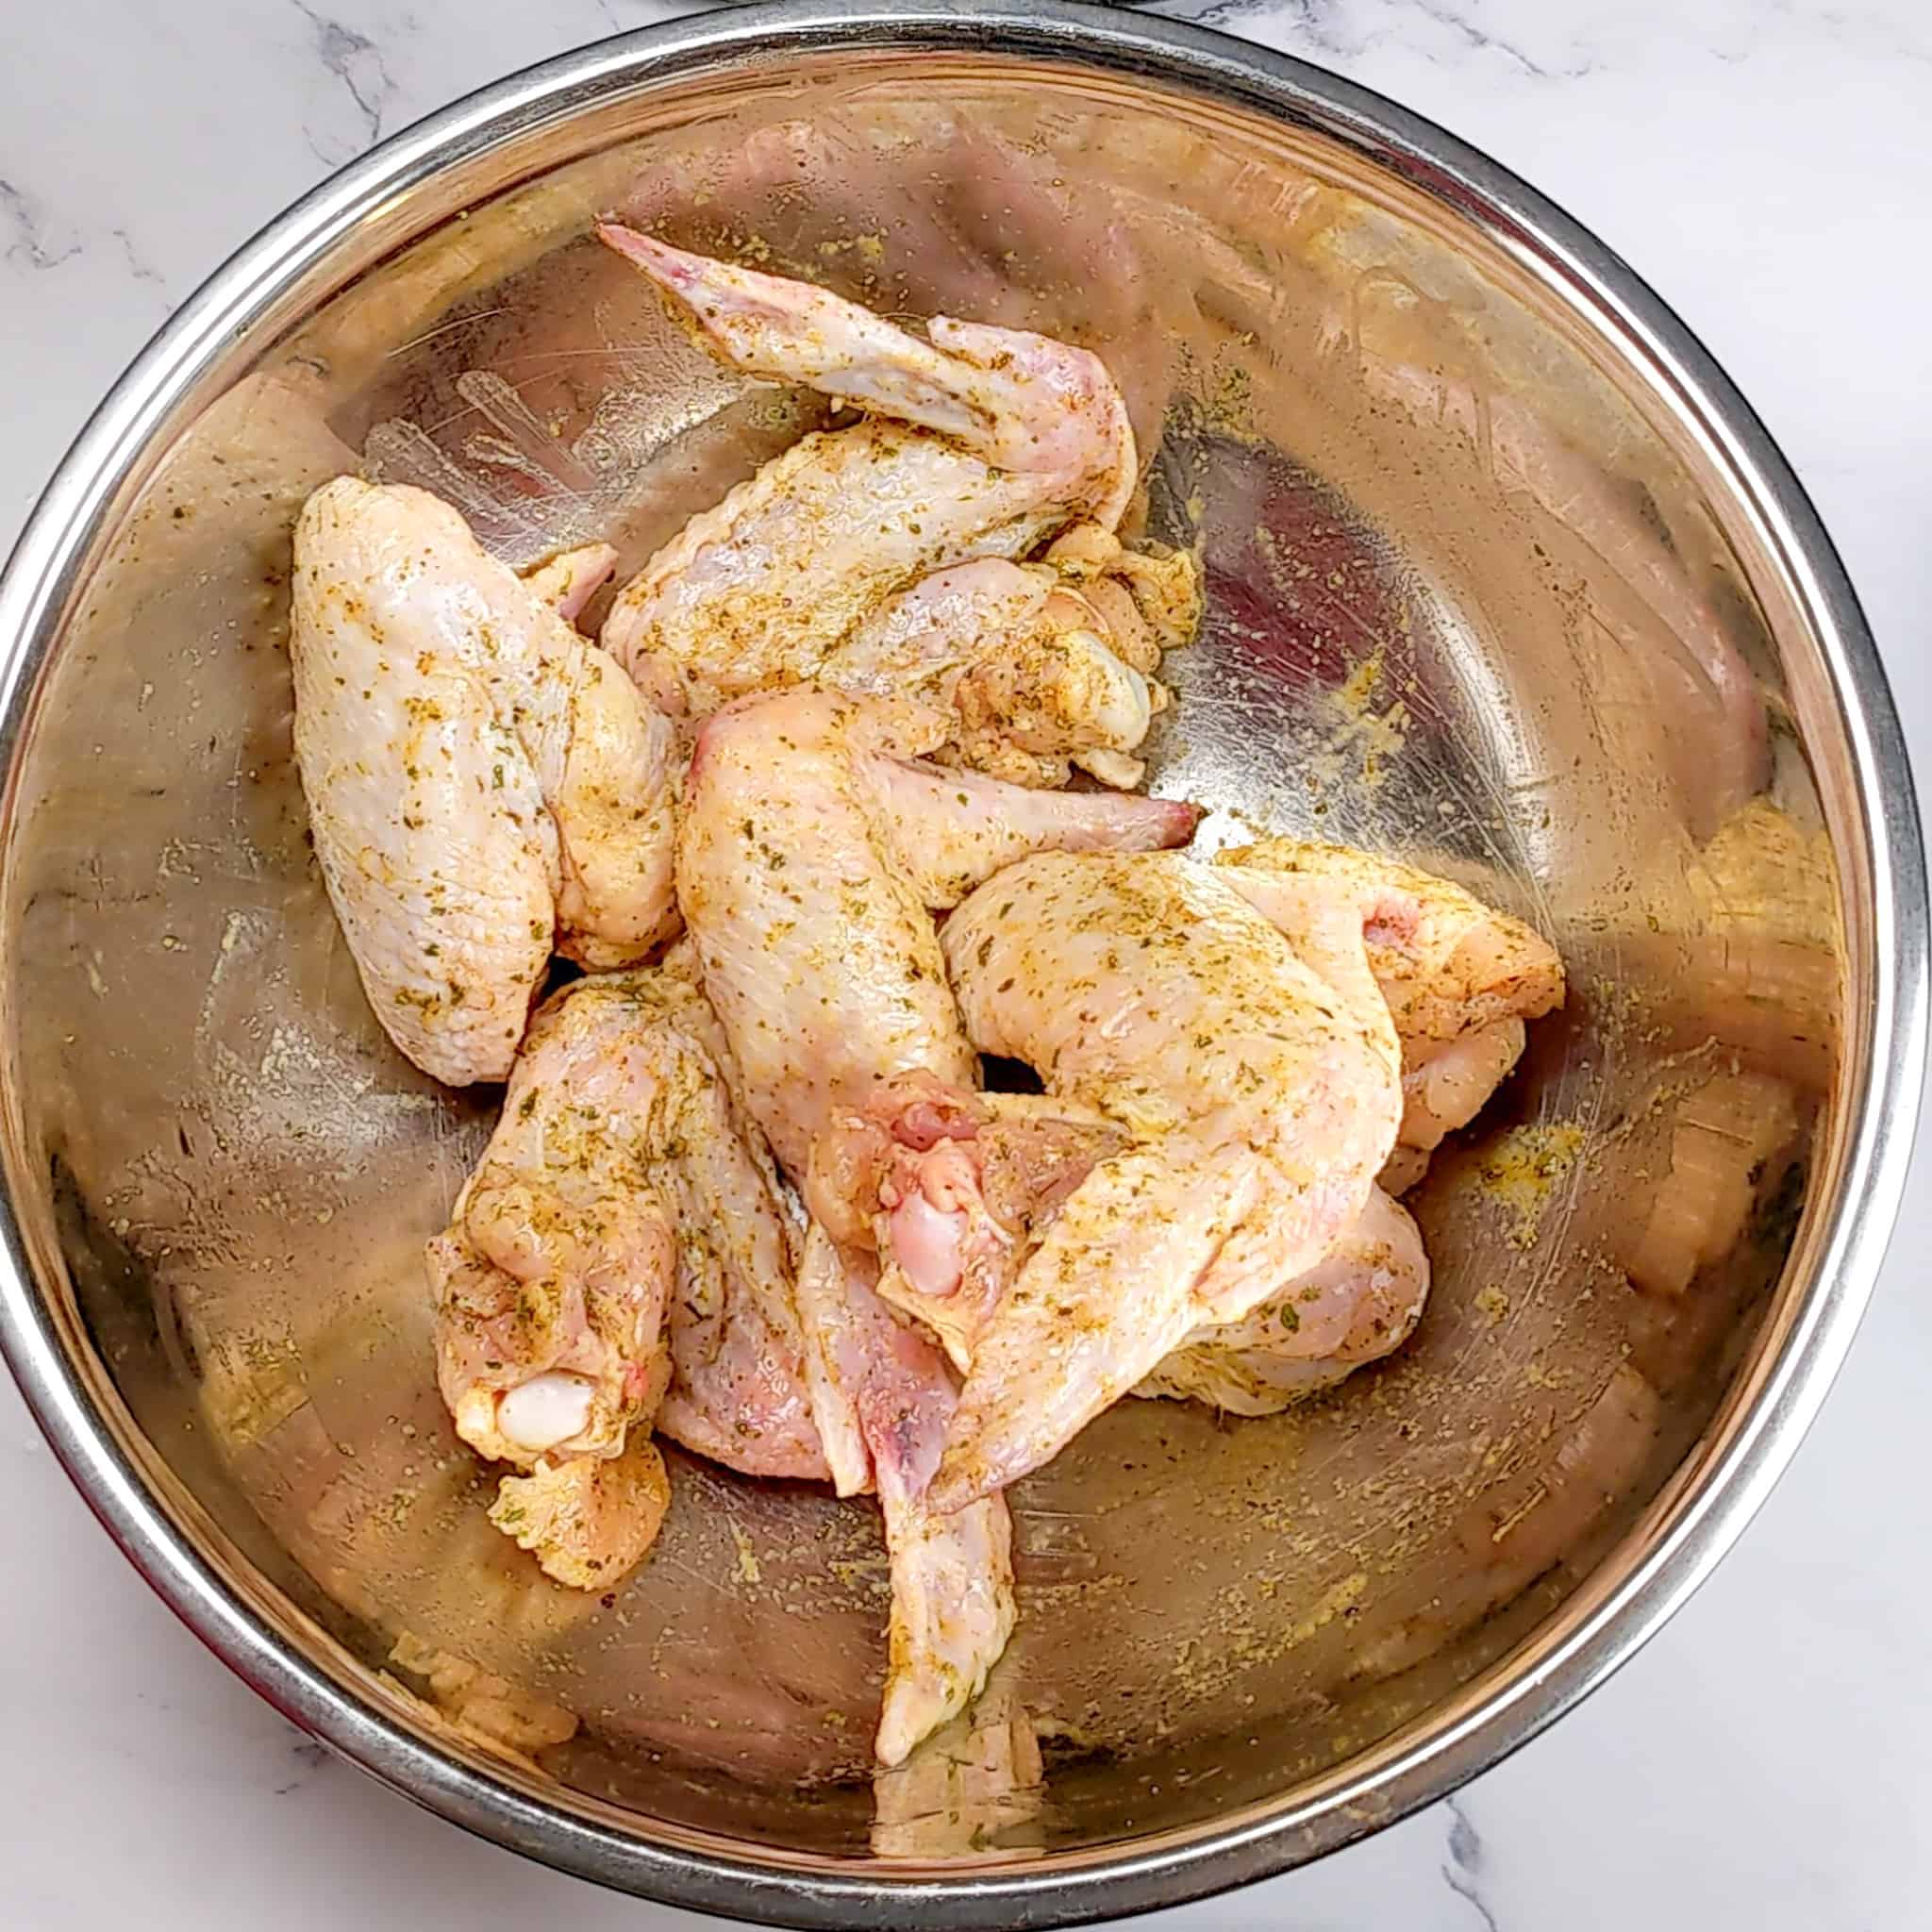 seasoned raw whole chicken wings in a stainless steel bowl